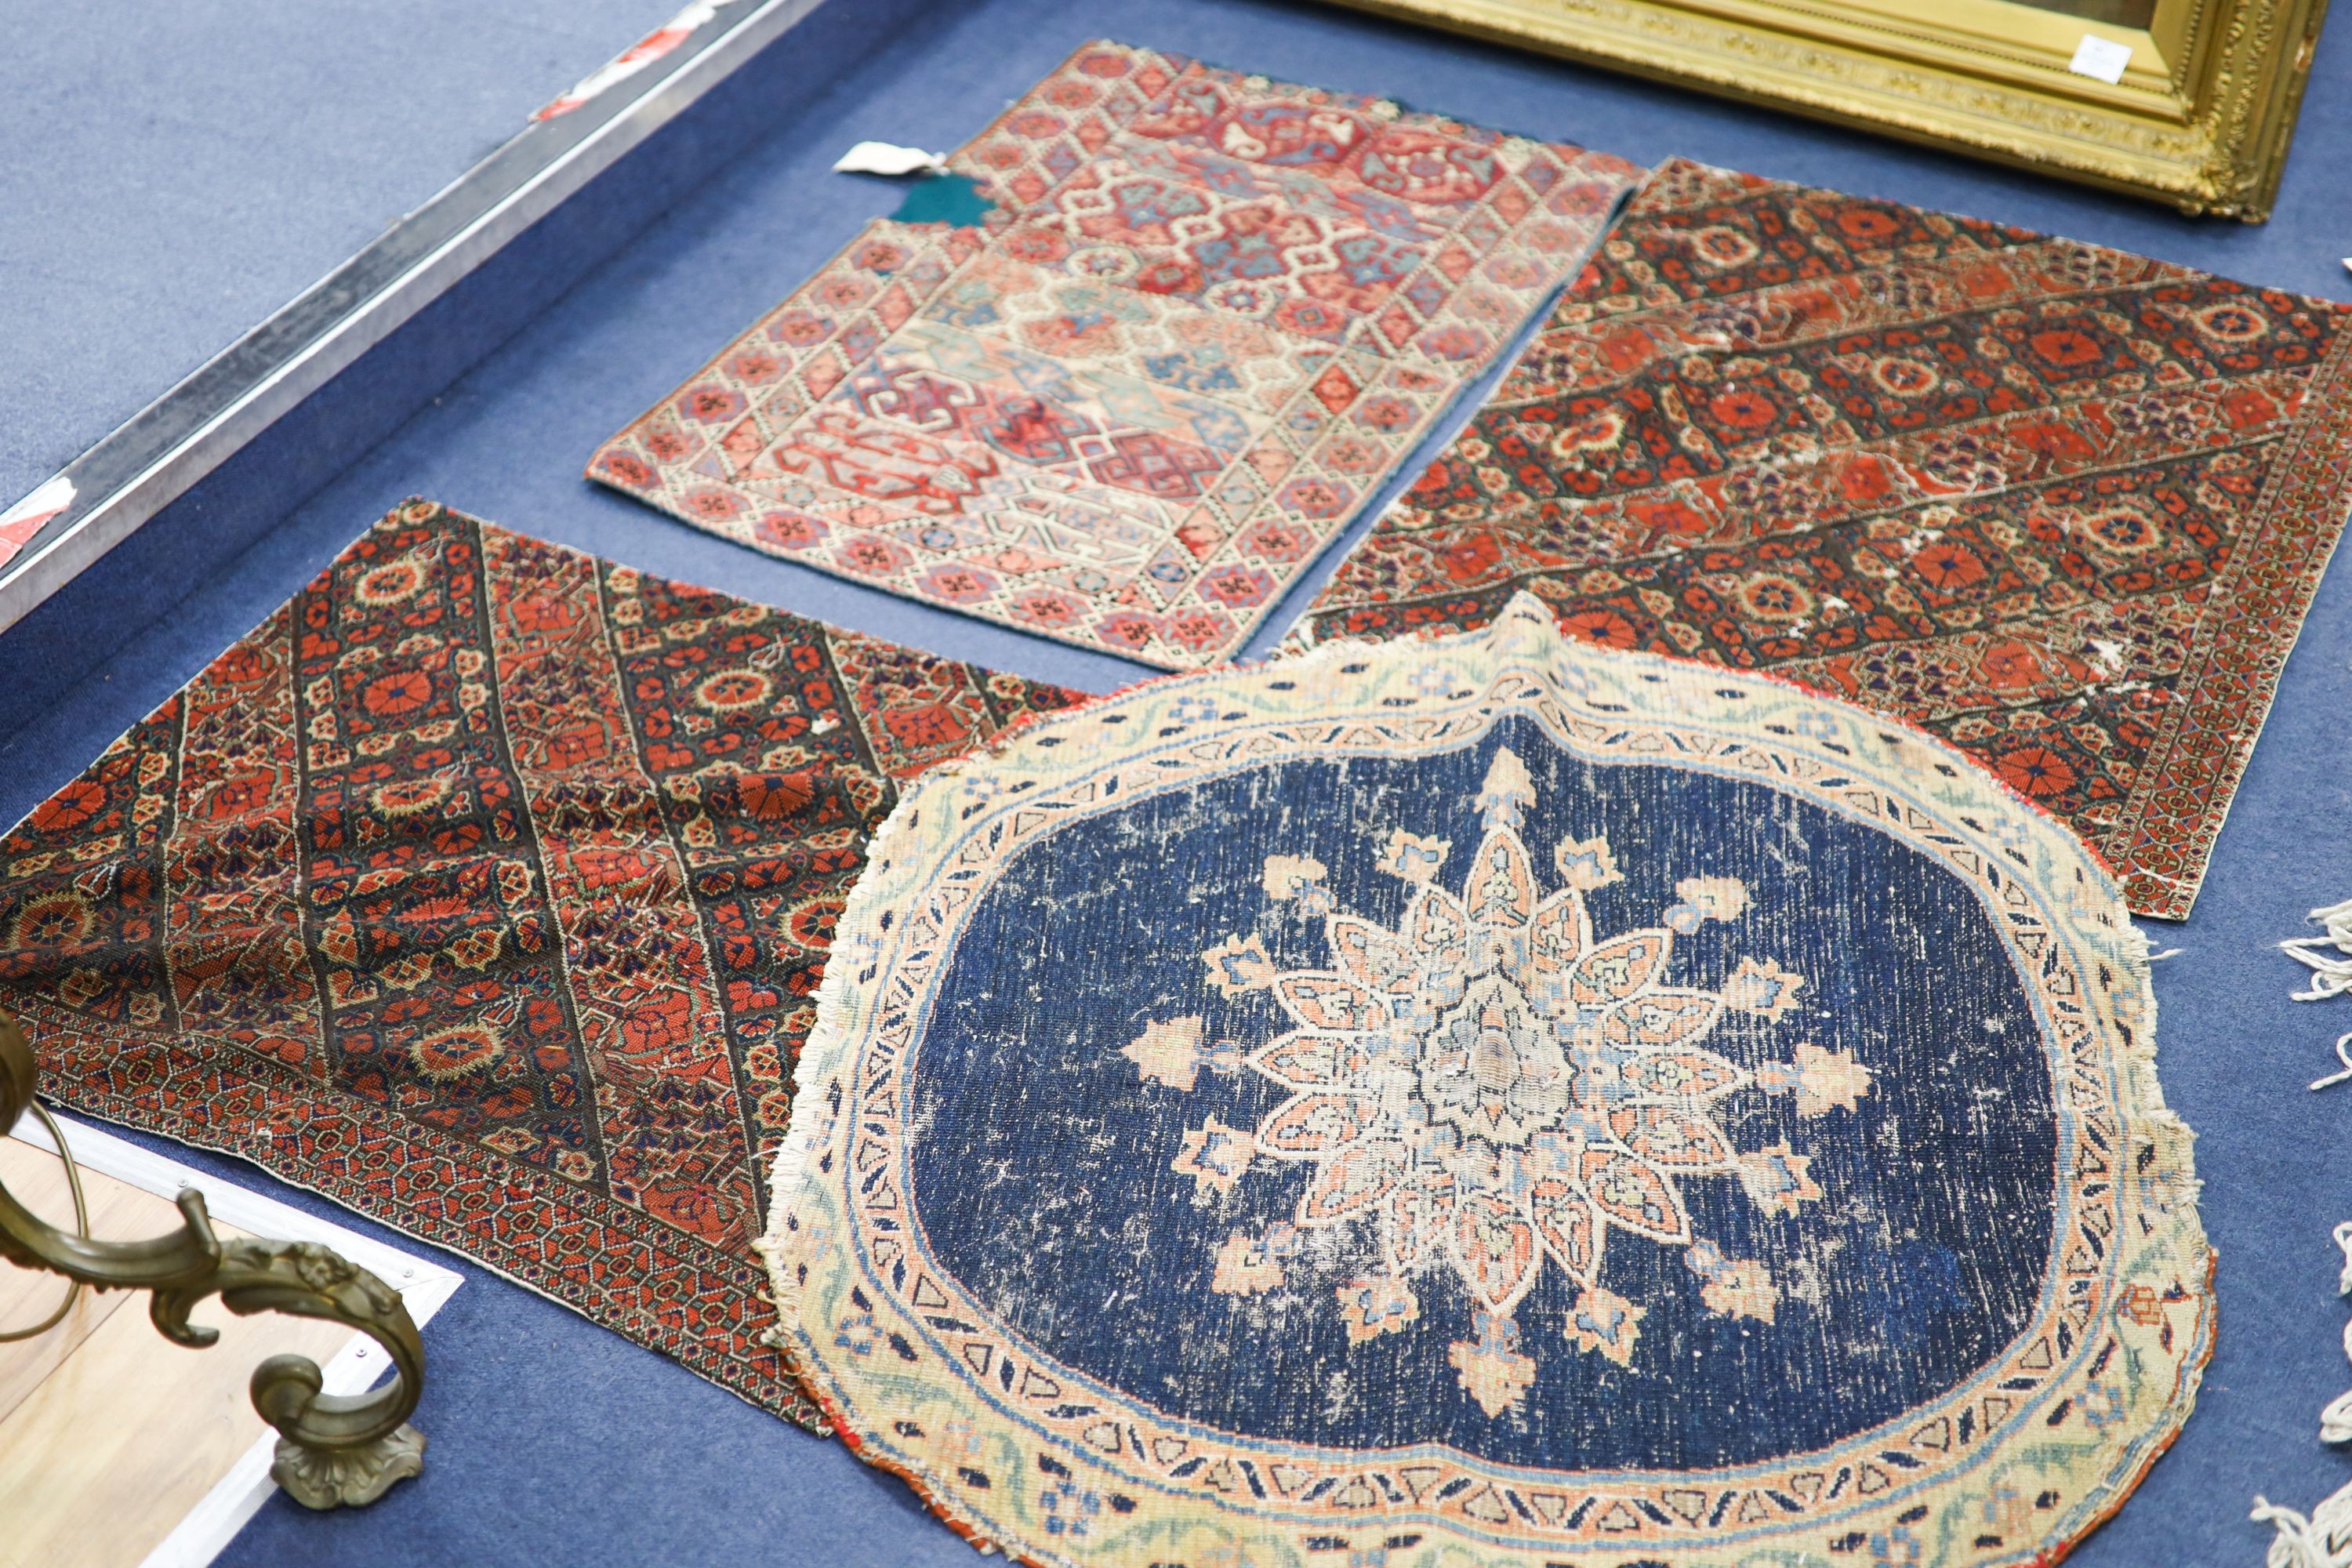 An Ottoman cross stitch embroidered cloth, 84 x 57cm., a pair of Persian antique needlework panels, 80 x 65cm. and a circular small rug, 86cm.                                                                              